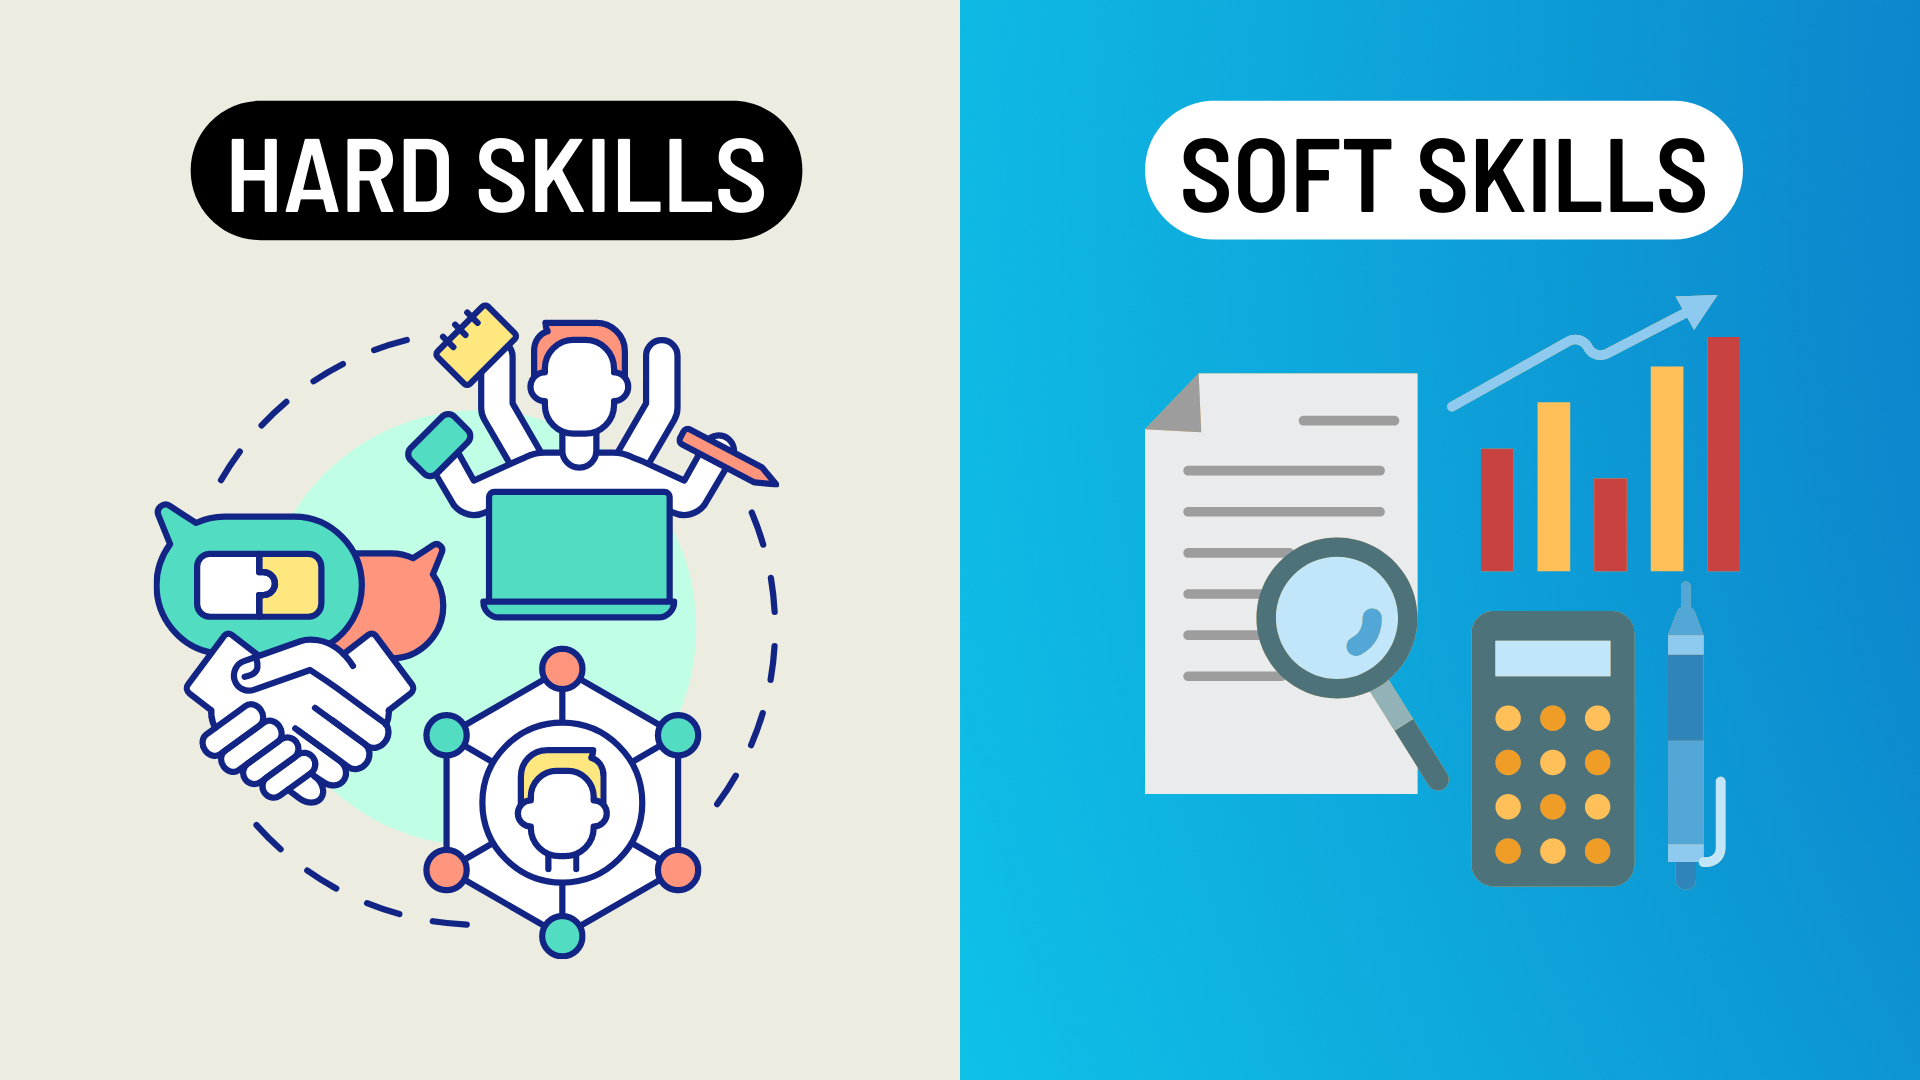 There are two types of skills [Soft Skills & Hard Skills]